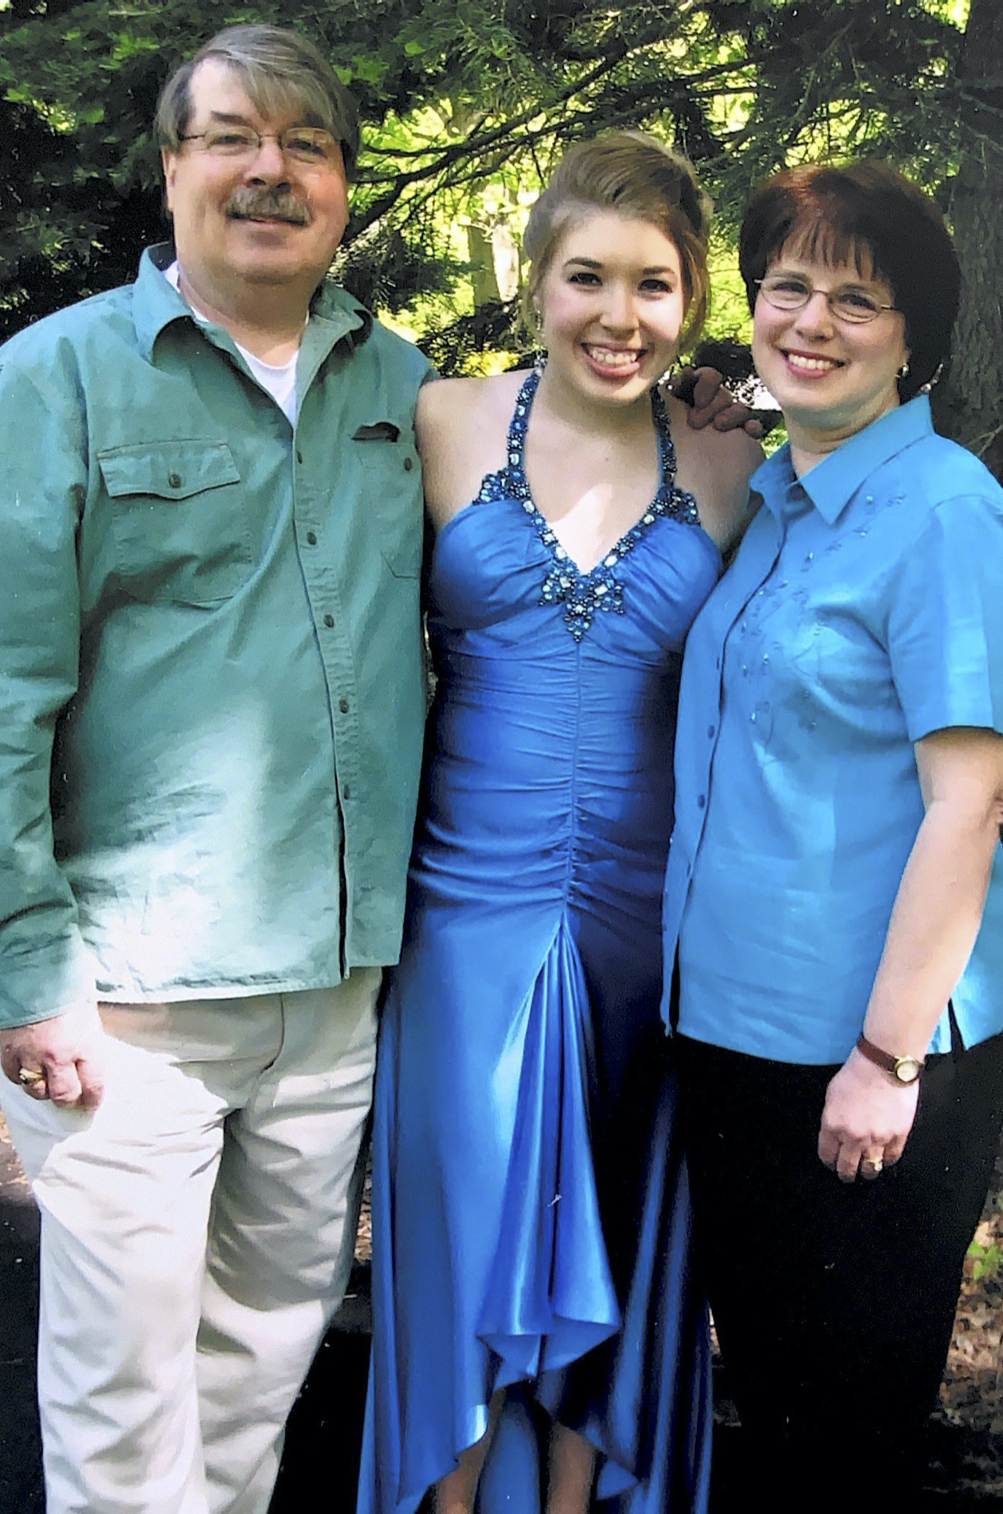 stephanie perry posing and smiling with her mom and dad